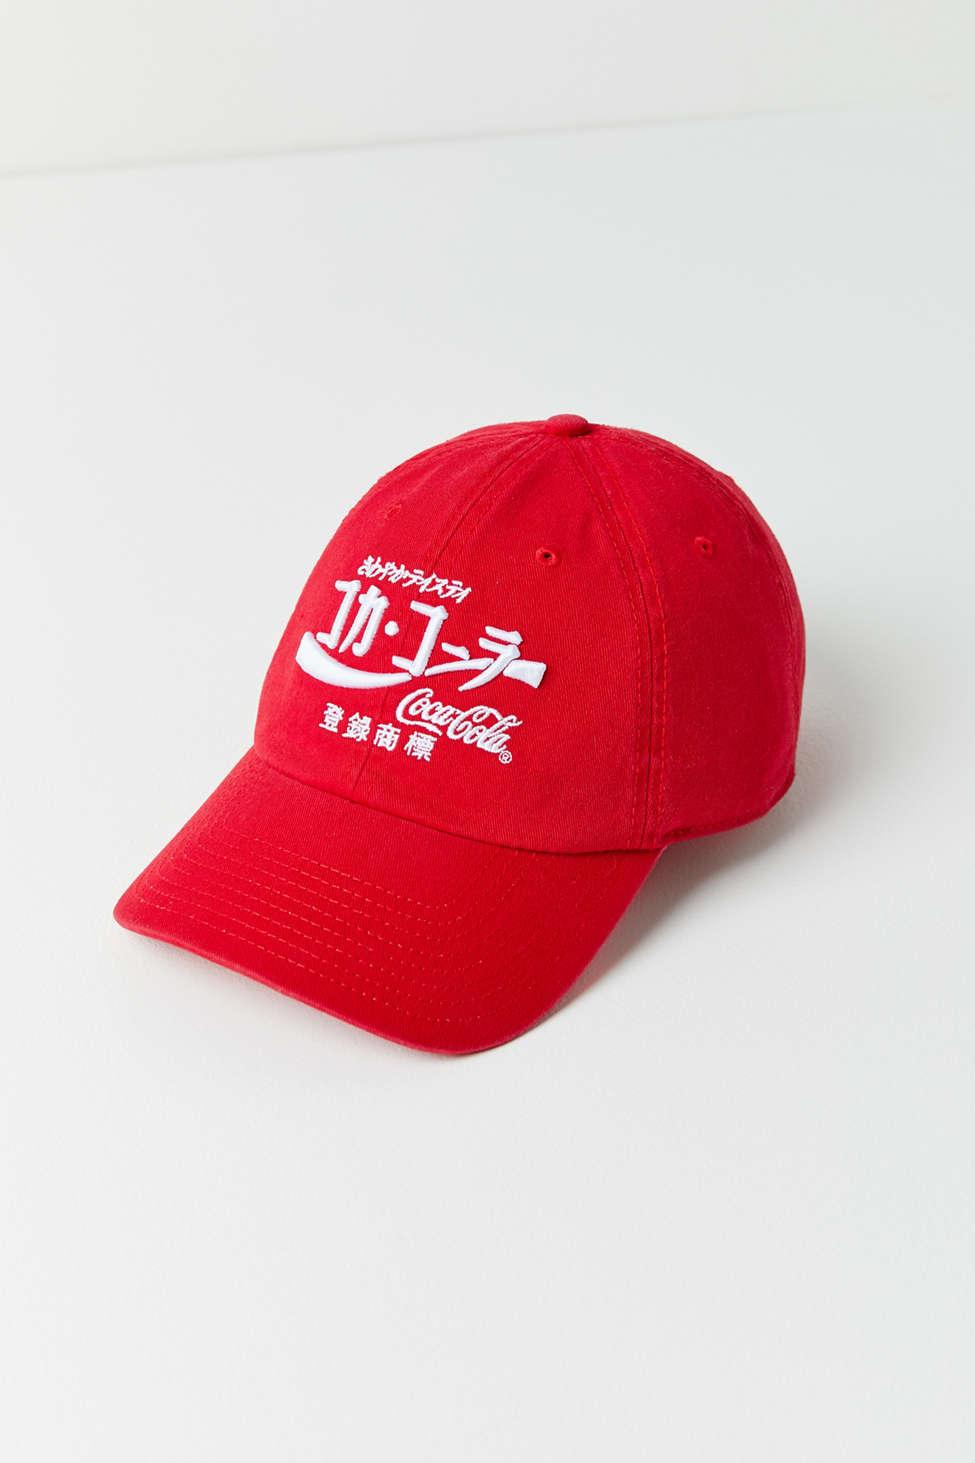 Urban Outfitters Cotton Uo Japanese Coca-cola Baseball Hat in Red - Lyst